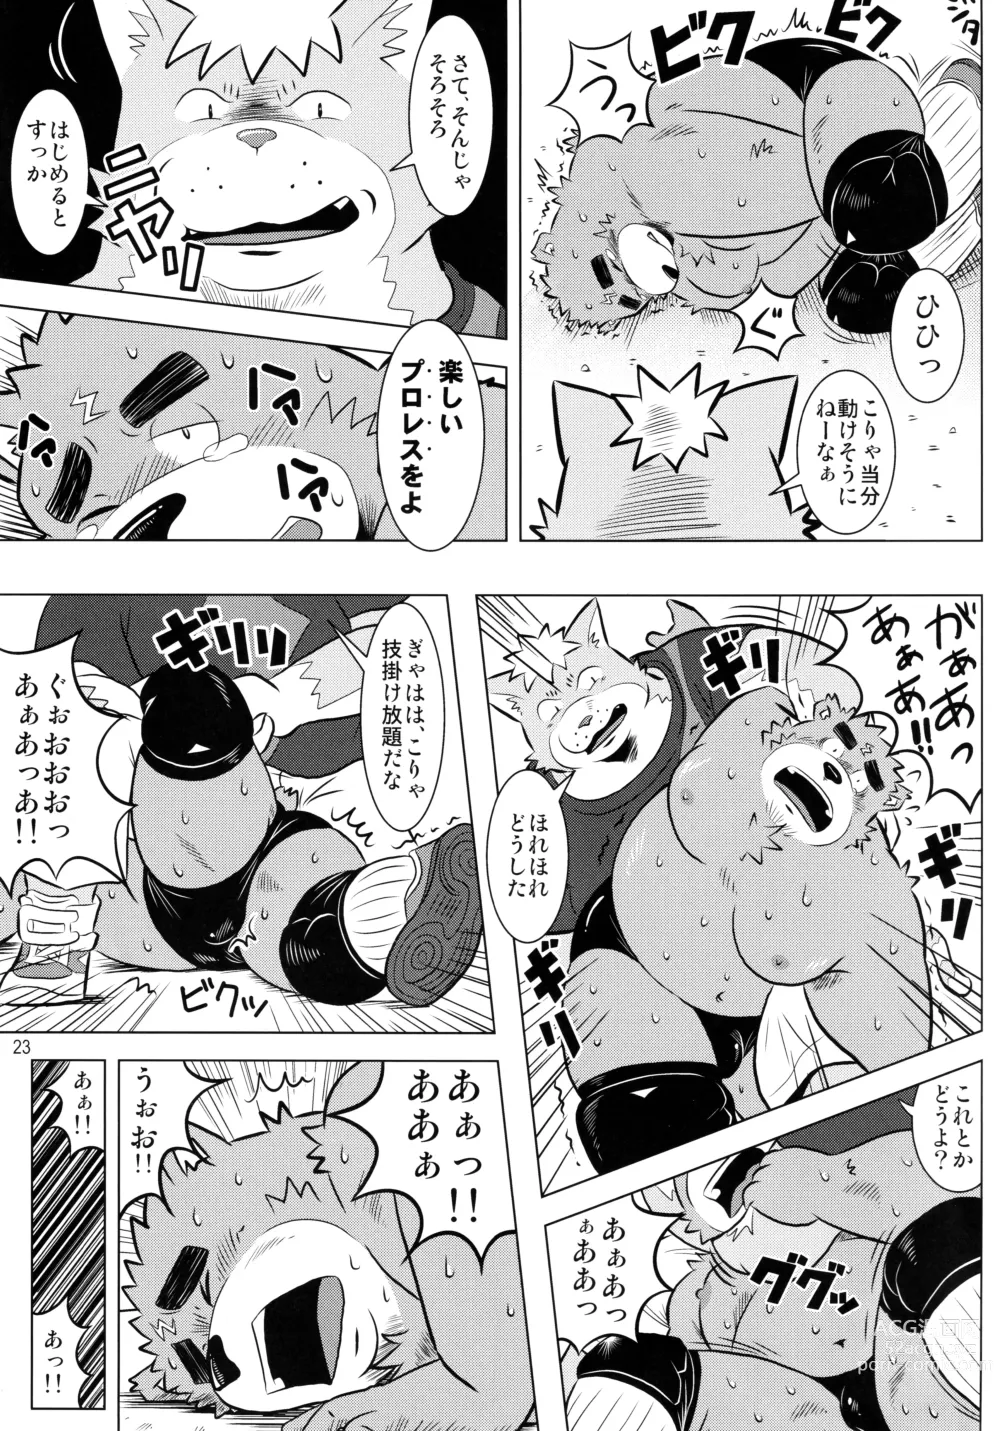 Page 24 of doujinshi BFW -BEAST FIGHTER WRESTLING-